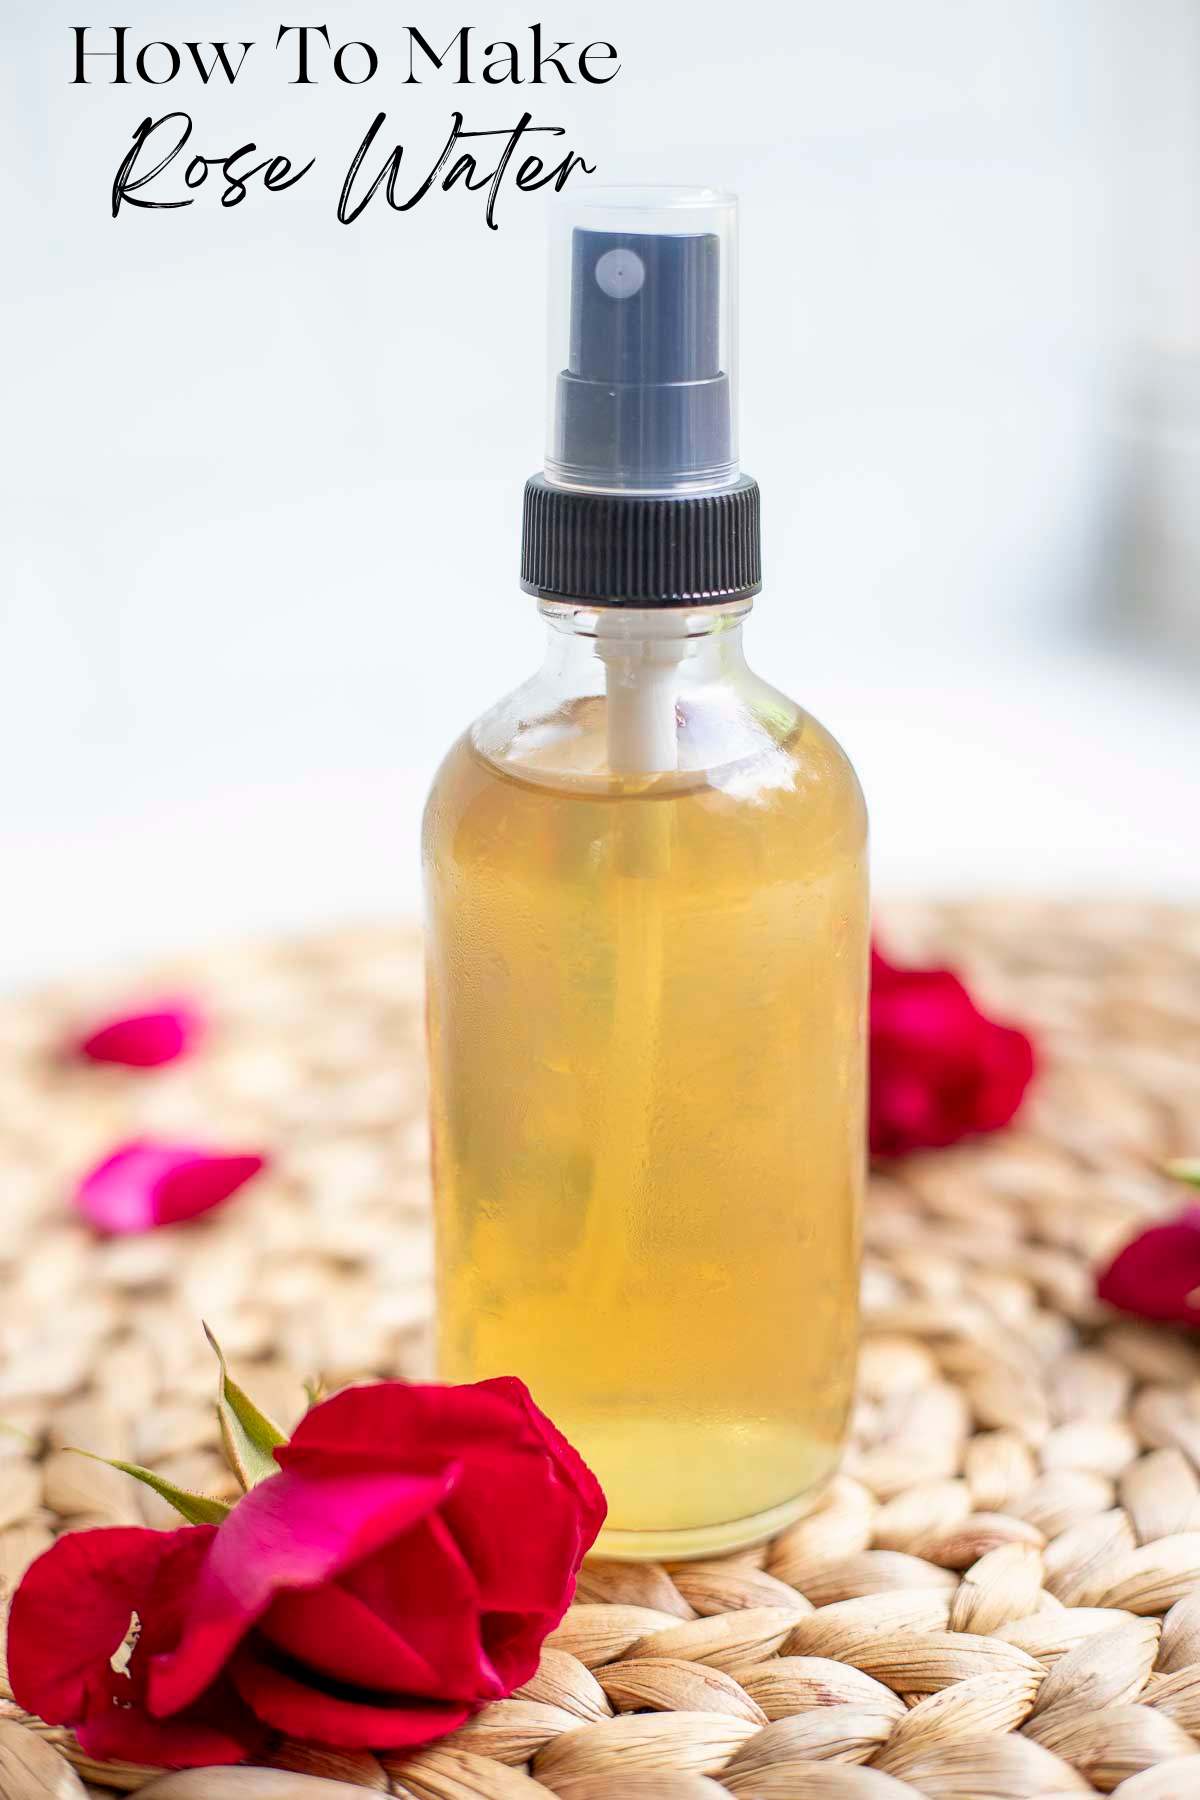 a small glass spray bottle with rose water on a woven place mat with rose petals on top.